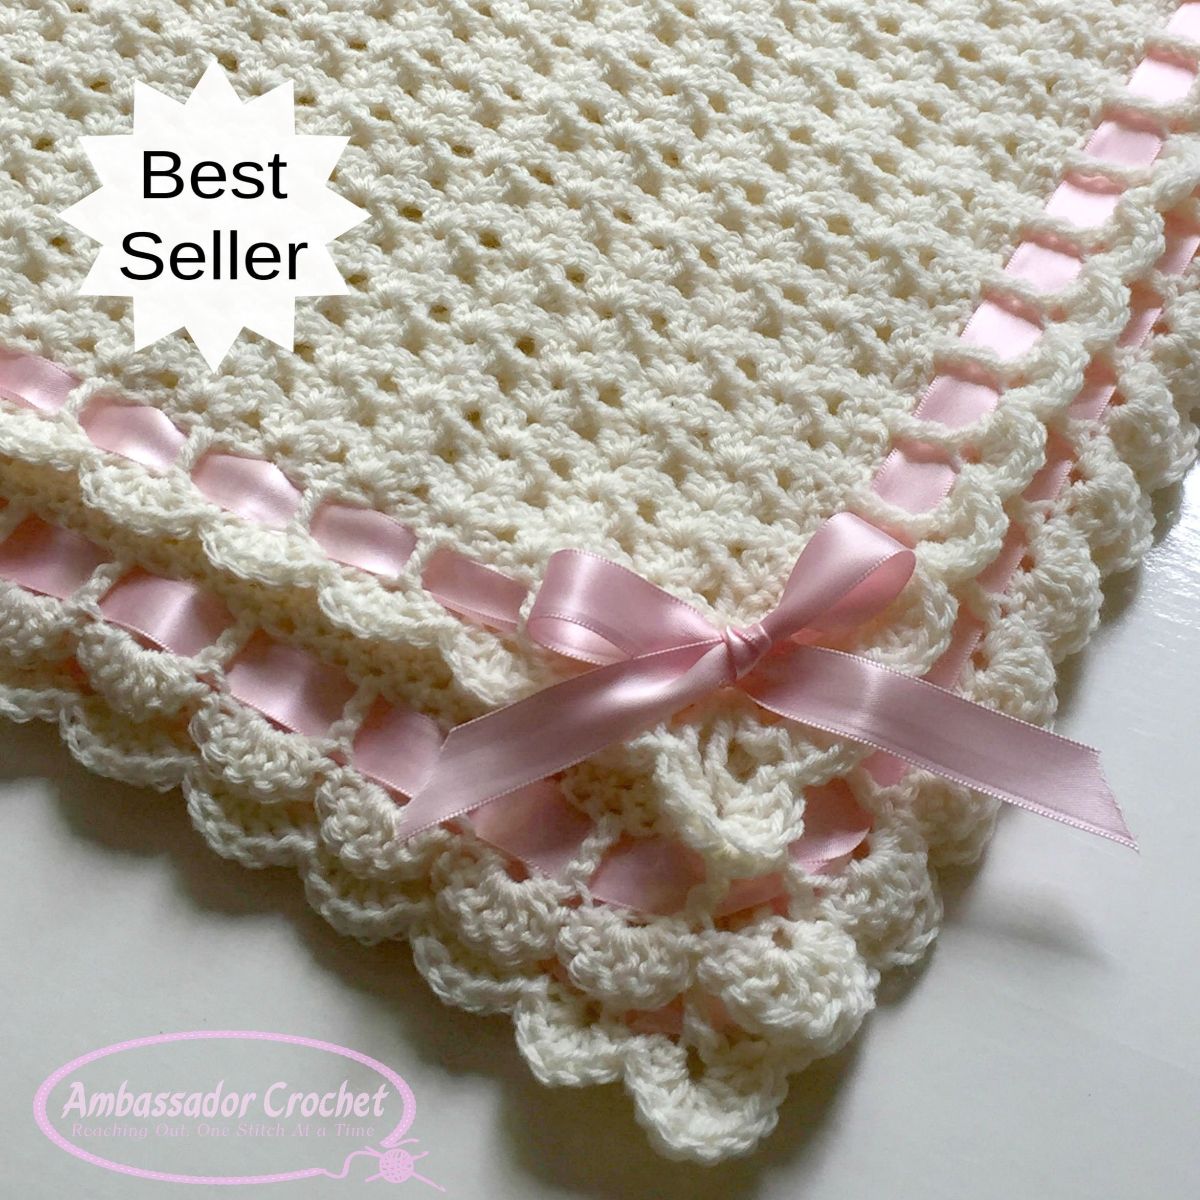 White crochet baby blanket with a pink satin ribbon stitched around the outside with a pink bow in the corner and a small lace trim underneath.